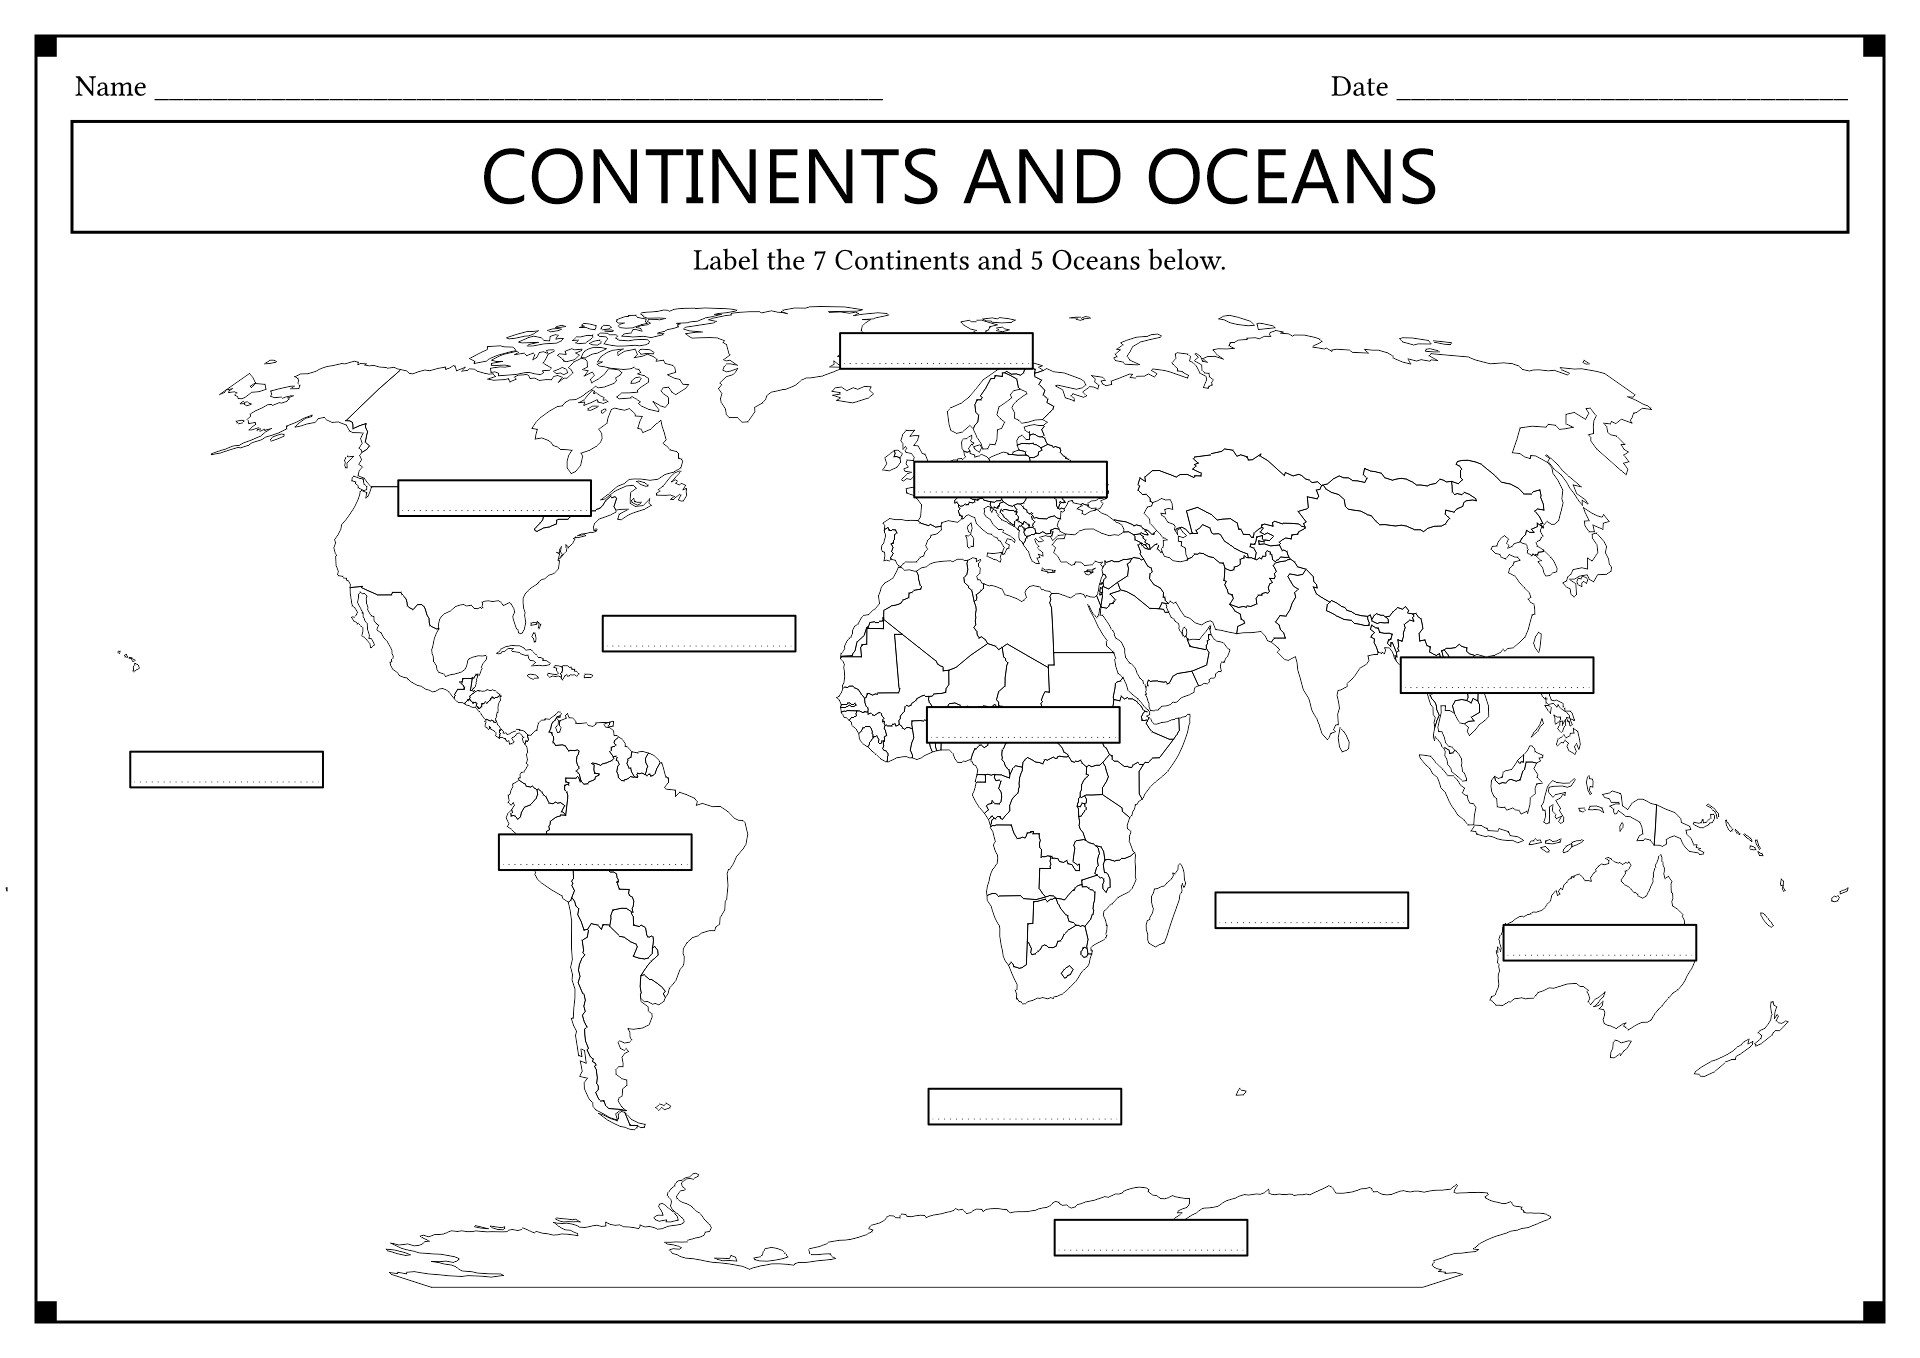 14 Blank Continents And Oceans Worksheets - Free PDF at worksheeto.com